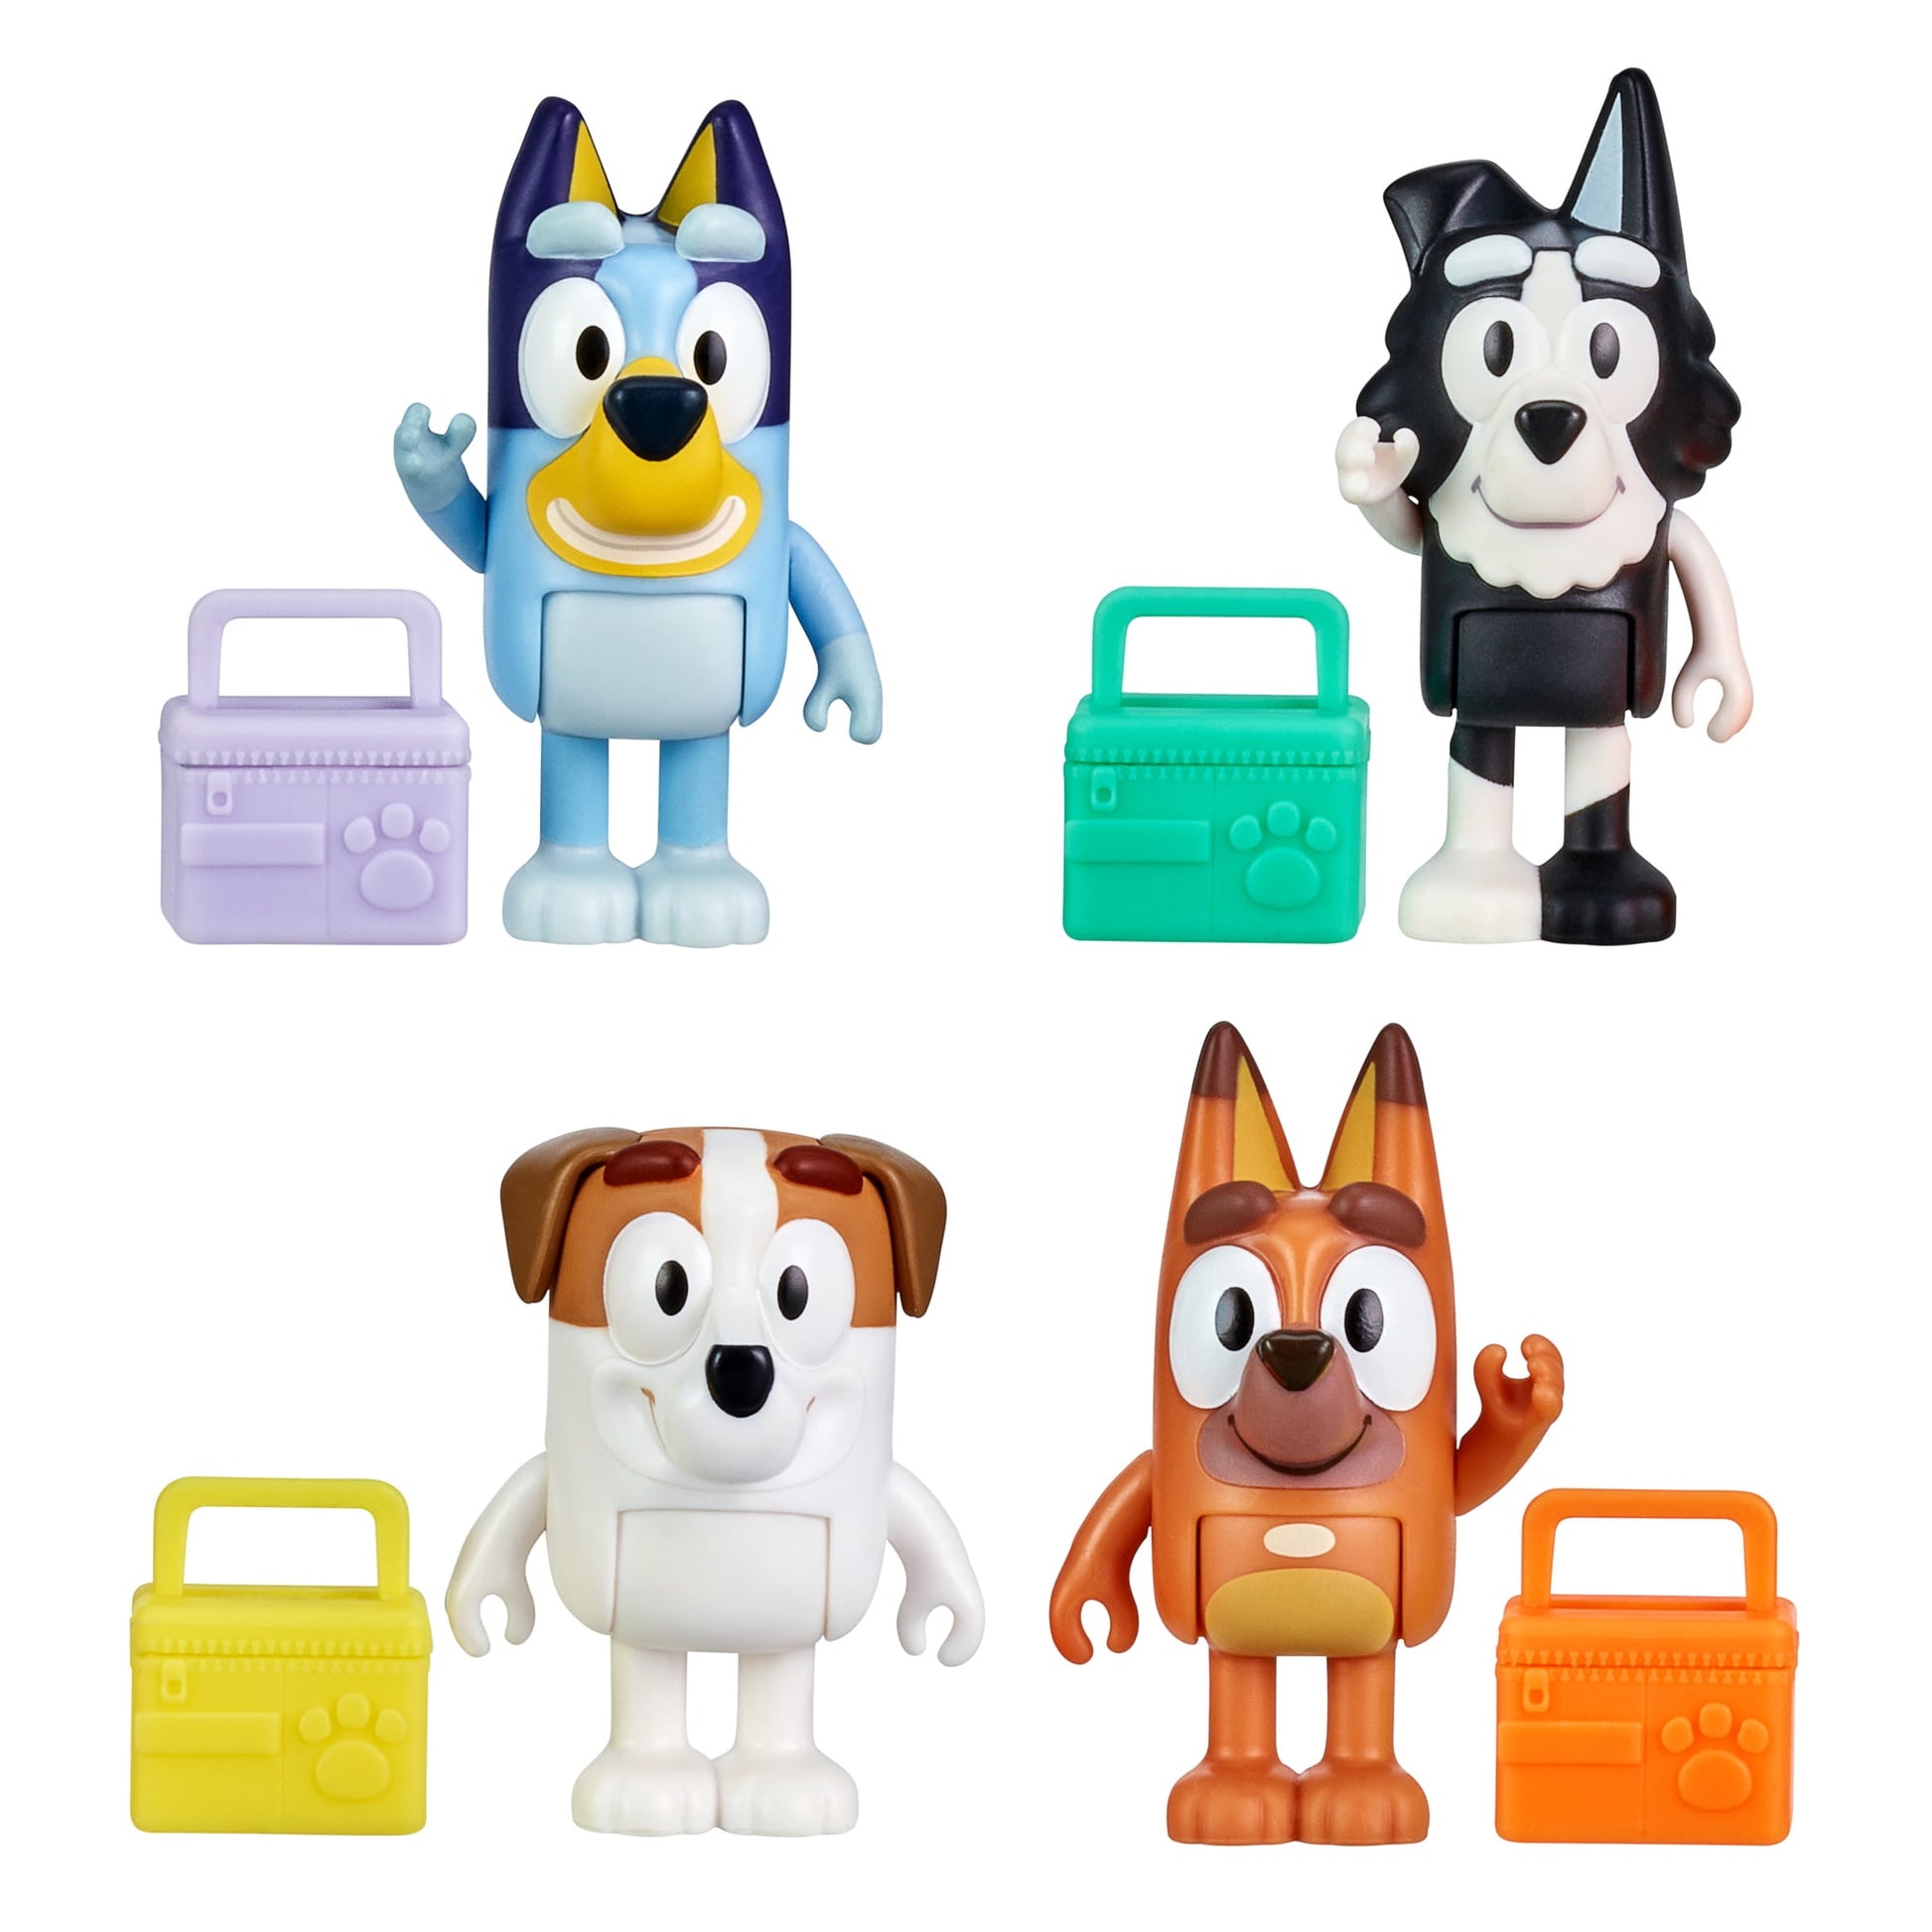 Bluey The Show 4-Pack, 2.5-3 inch Figures, Bluey's family - Bluey, Bingo,  Chilli (Mum) and Bandit (Dad), Preschool, Toys for Kids, Ages 3+